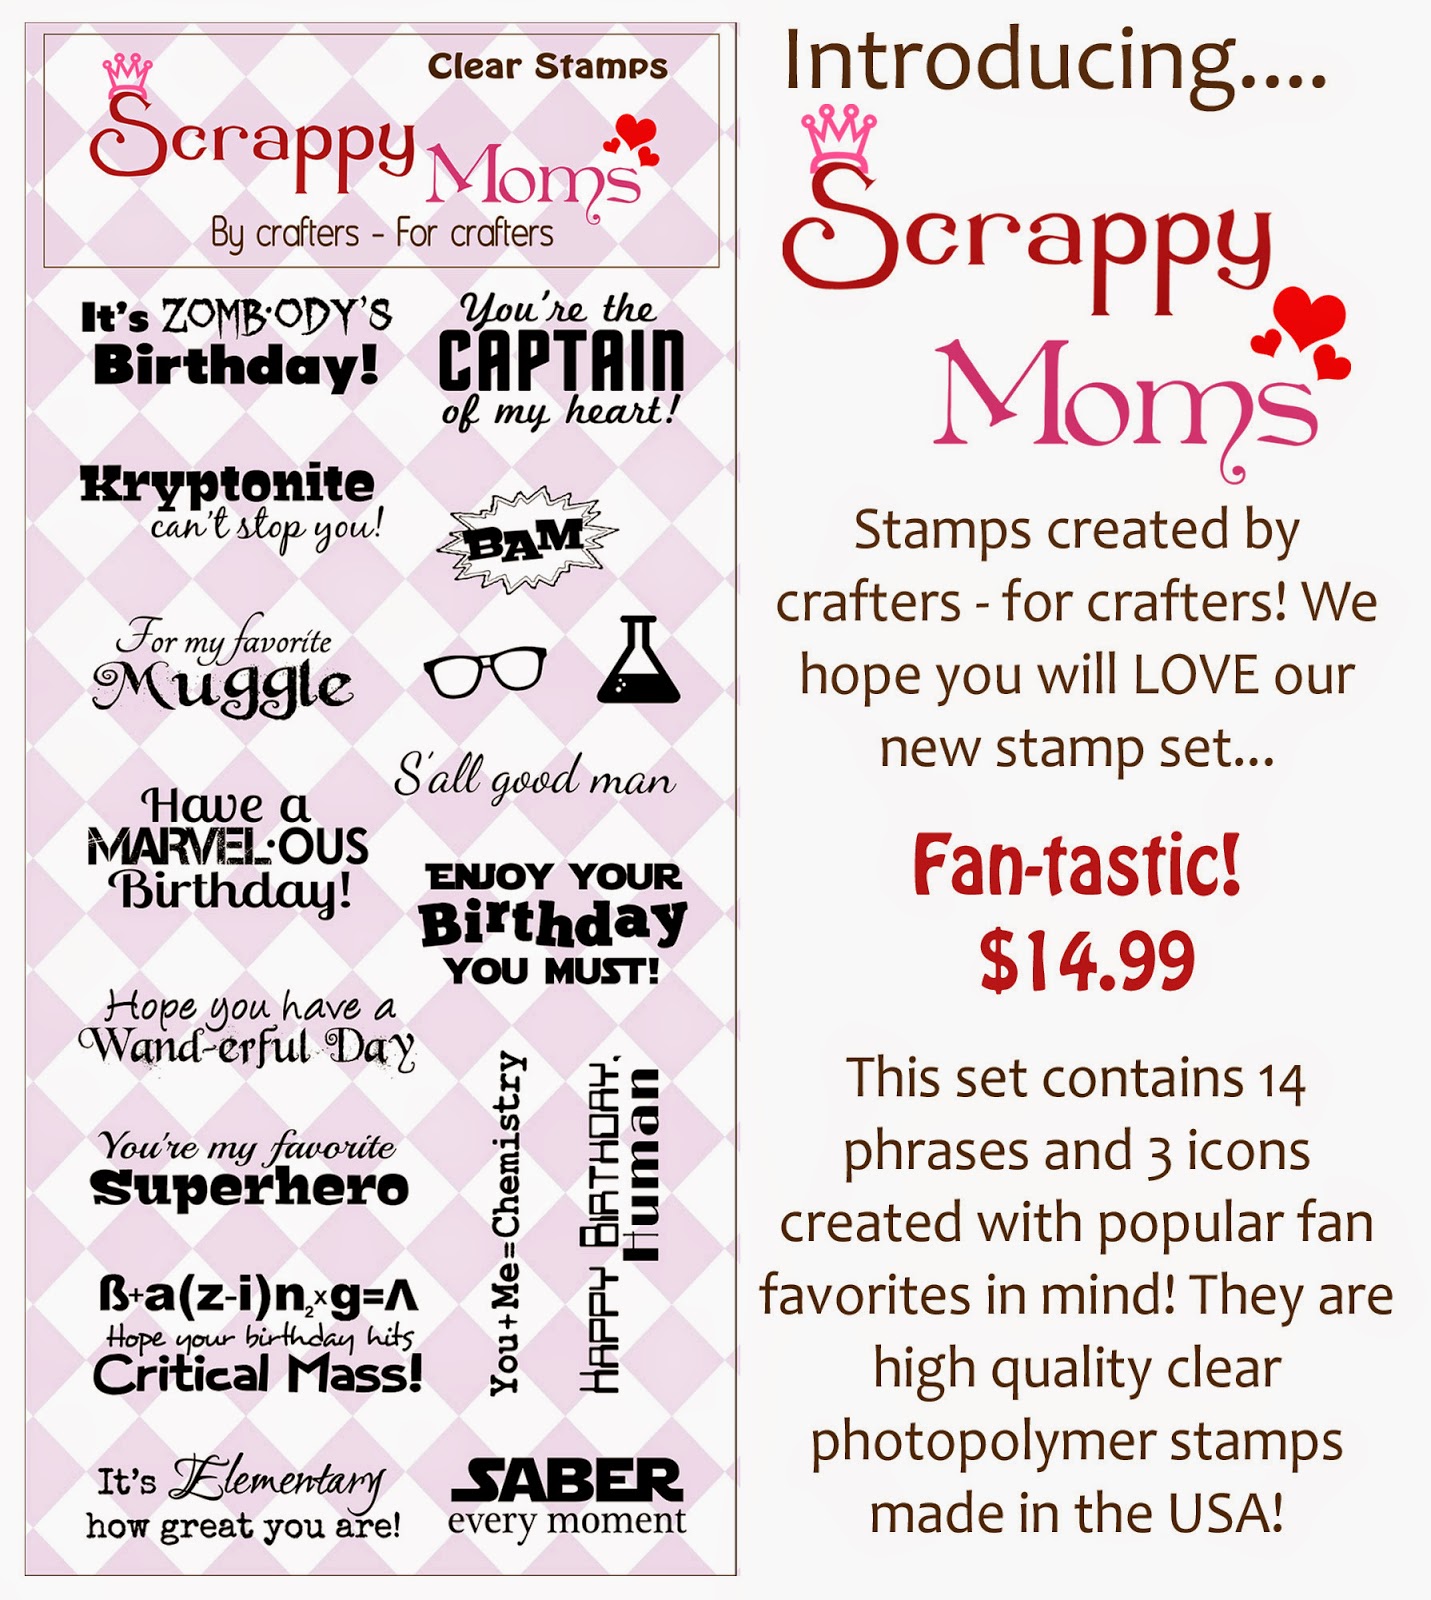 http://scrappymoms-stamps-store.blogspot.com/2010/01/newest-stamp-sets.html